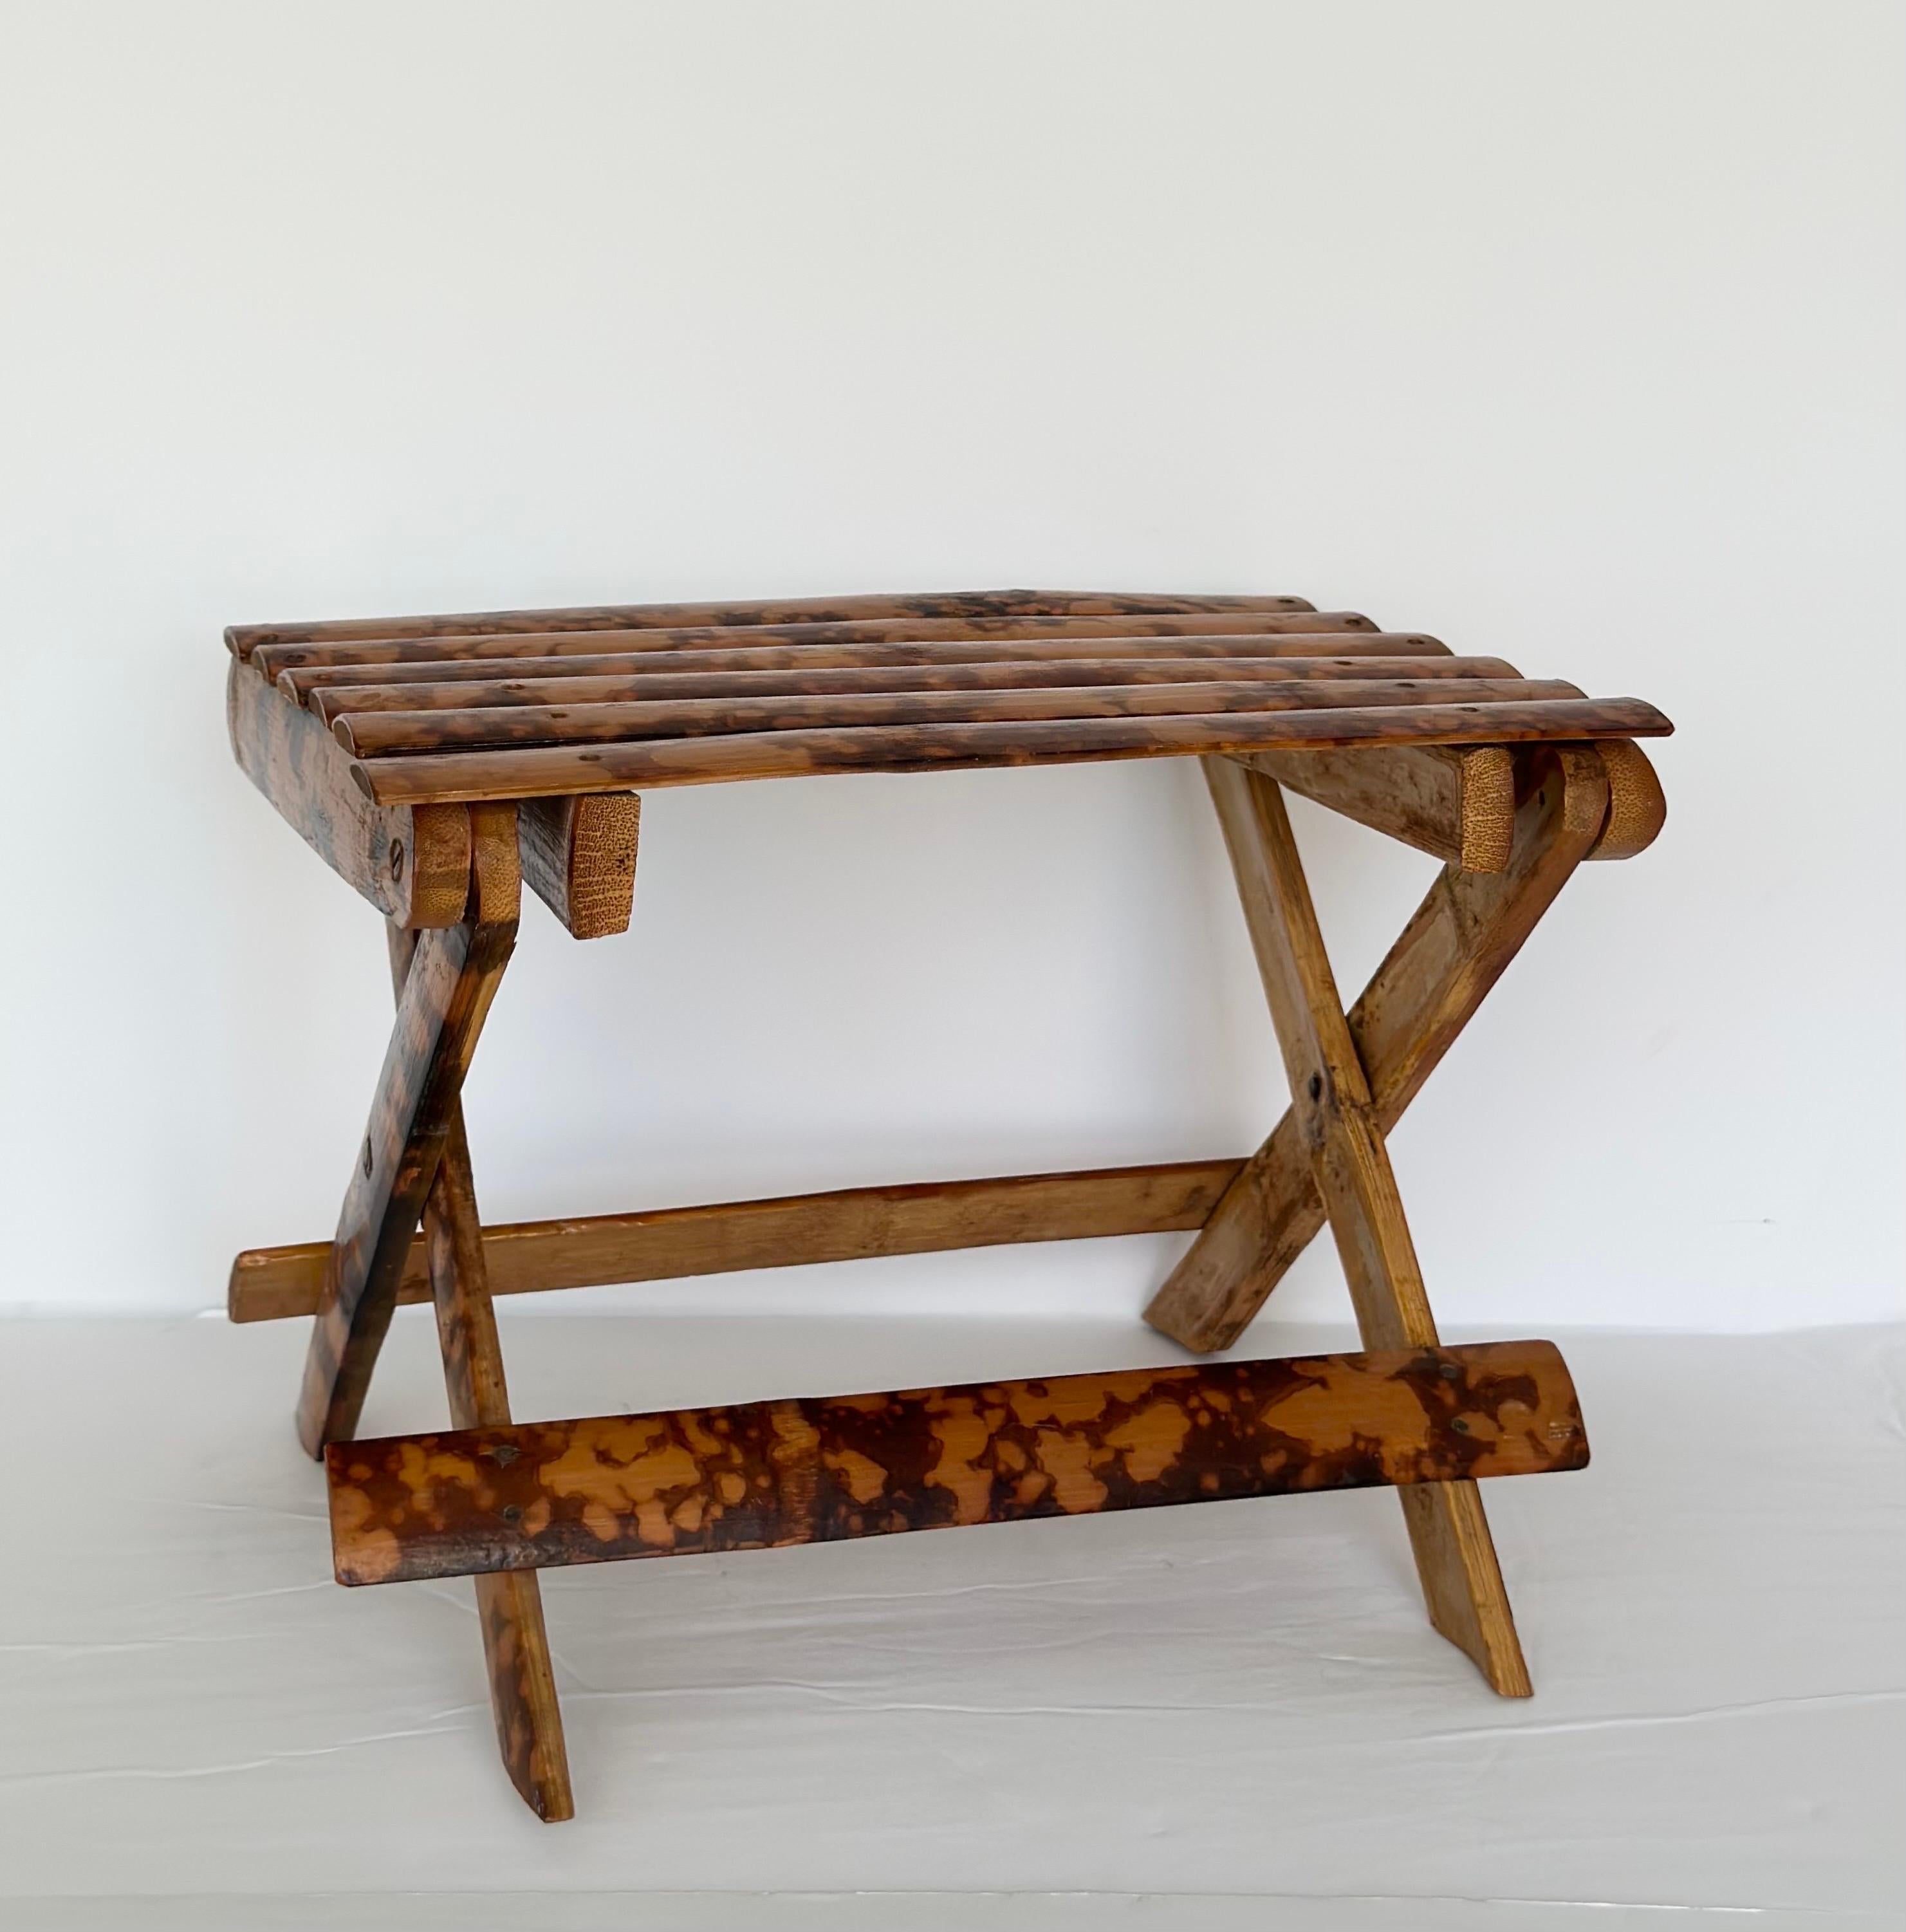 We are very pleased to offer a stunning stool, circa the 1950s.  This piece is crafted from bamboo, a lightweight and sustainable material, its appeal is enhanced by a burnt tortoise finish, giving it a distinct look. The burned bamboo exudes warmth